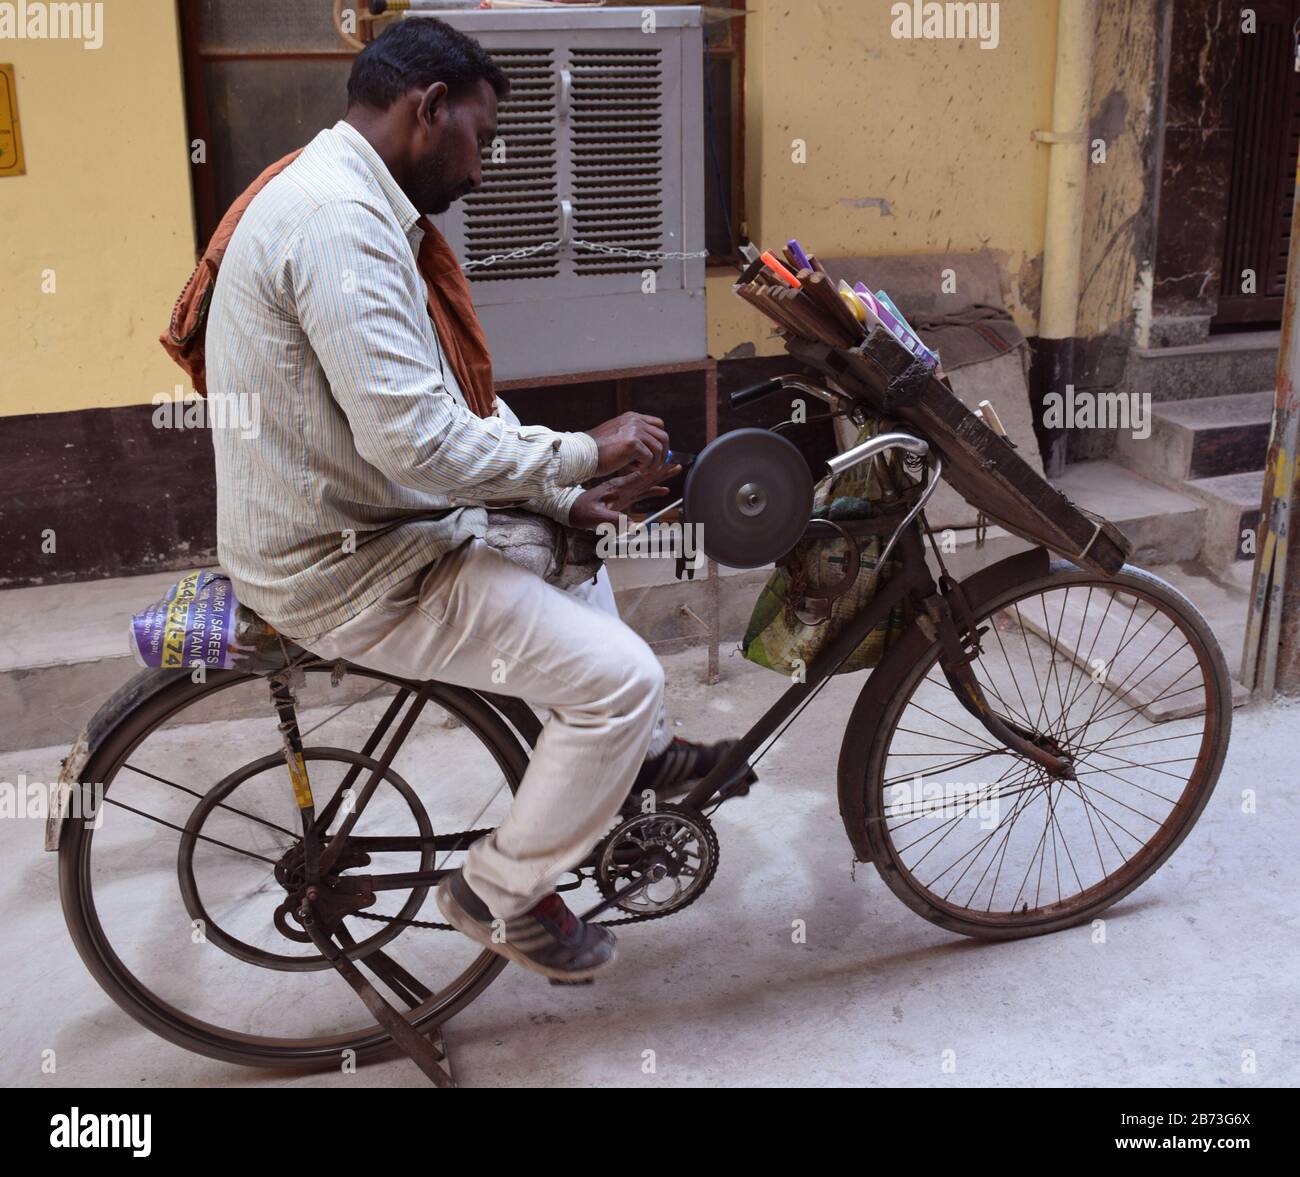 Door To Door Sharpener - A Delhi man uses his ingeniously rigged bicycle to sharpen  knives from restaurant to restaurant. - Delhi, India - Daily Travel Photos  - Once Daily Images From